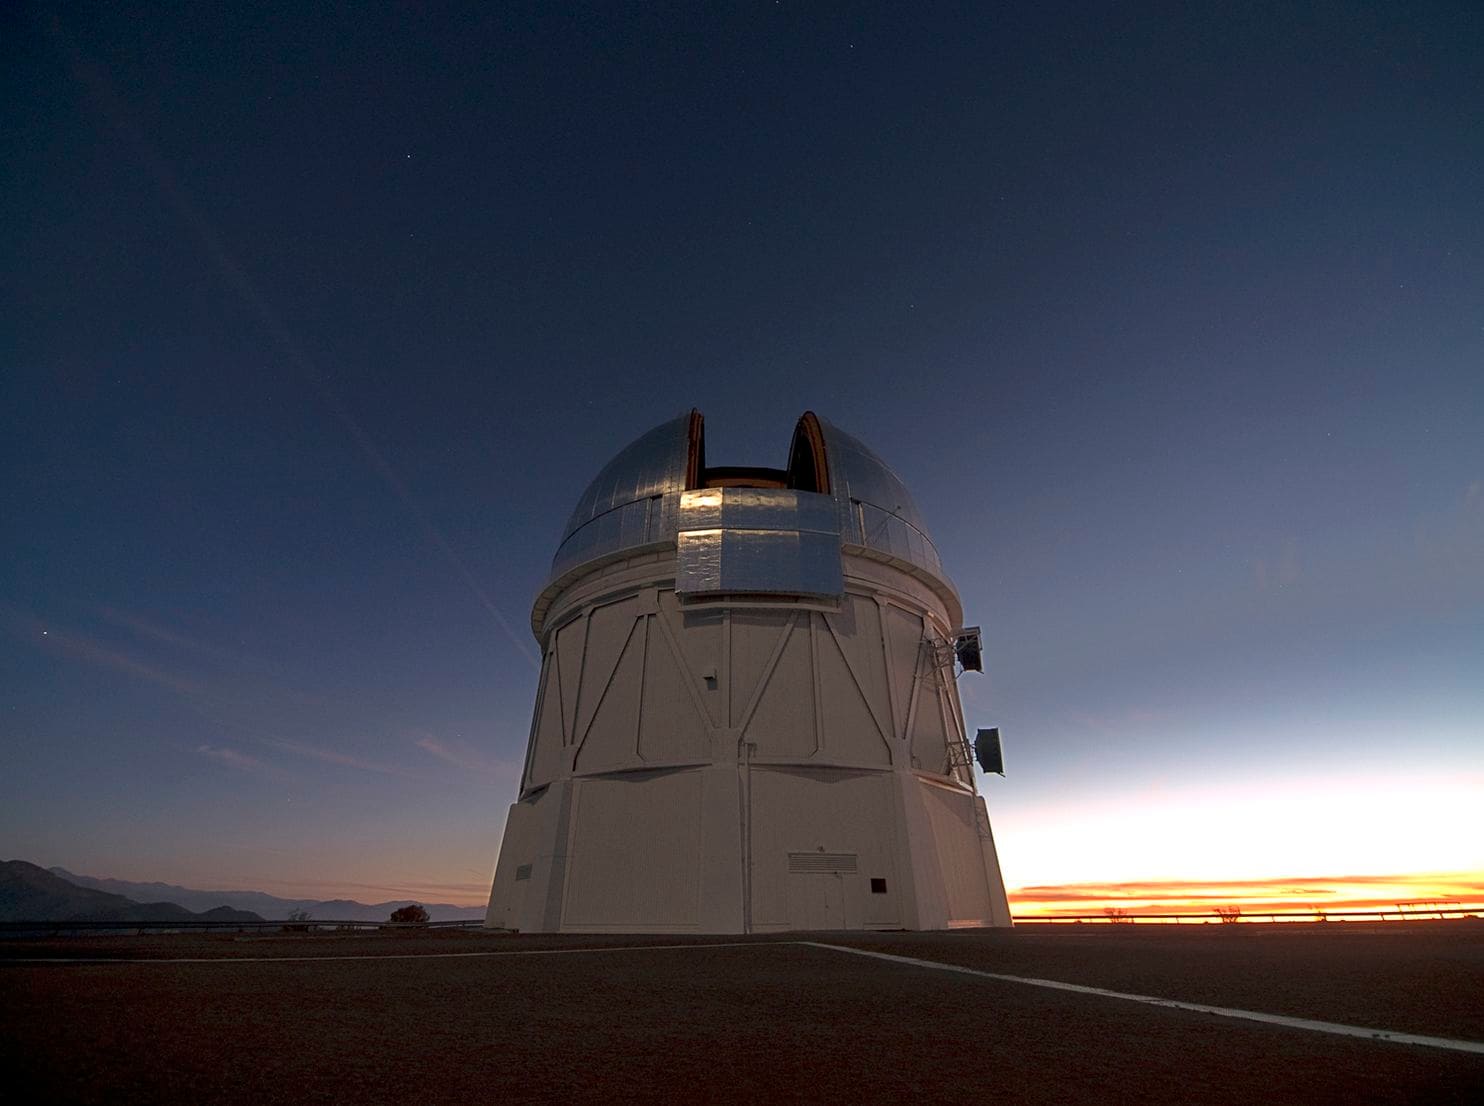 The shutdown could soon block telescopes’ view of the heavens